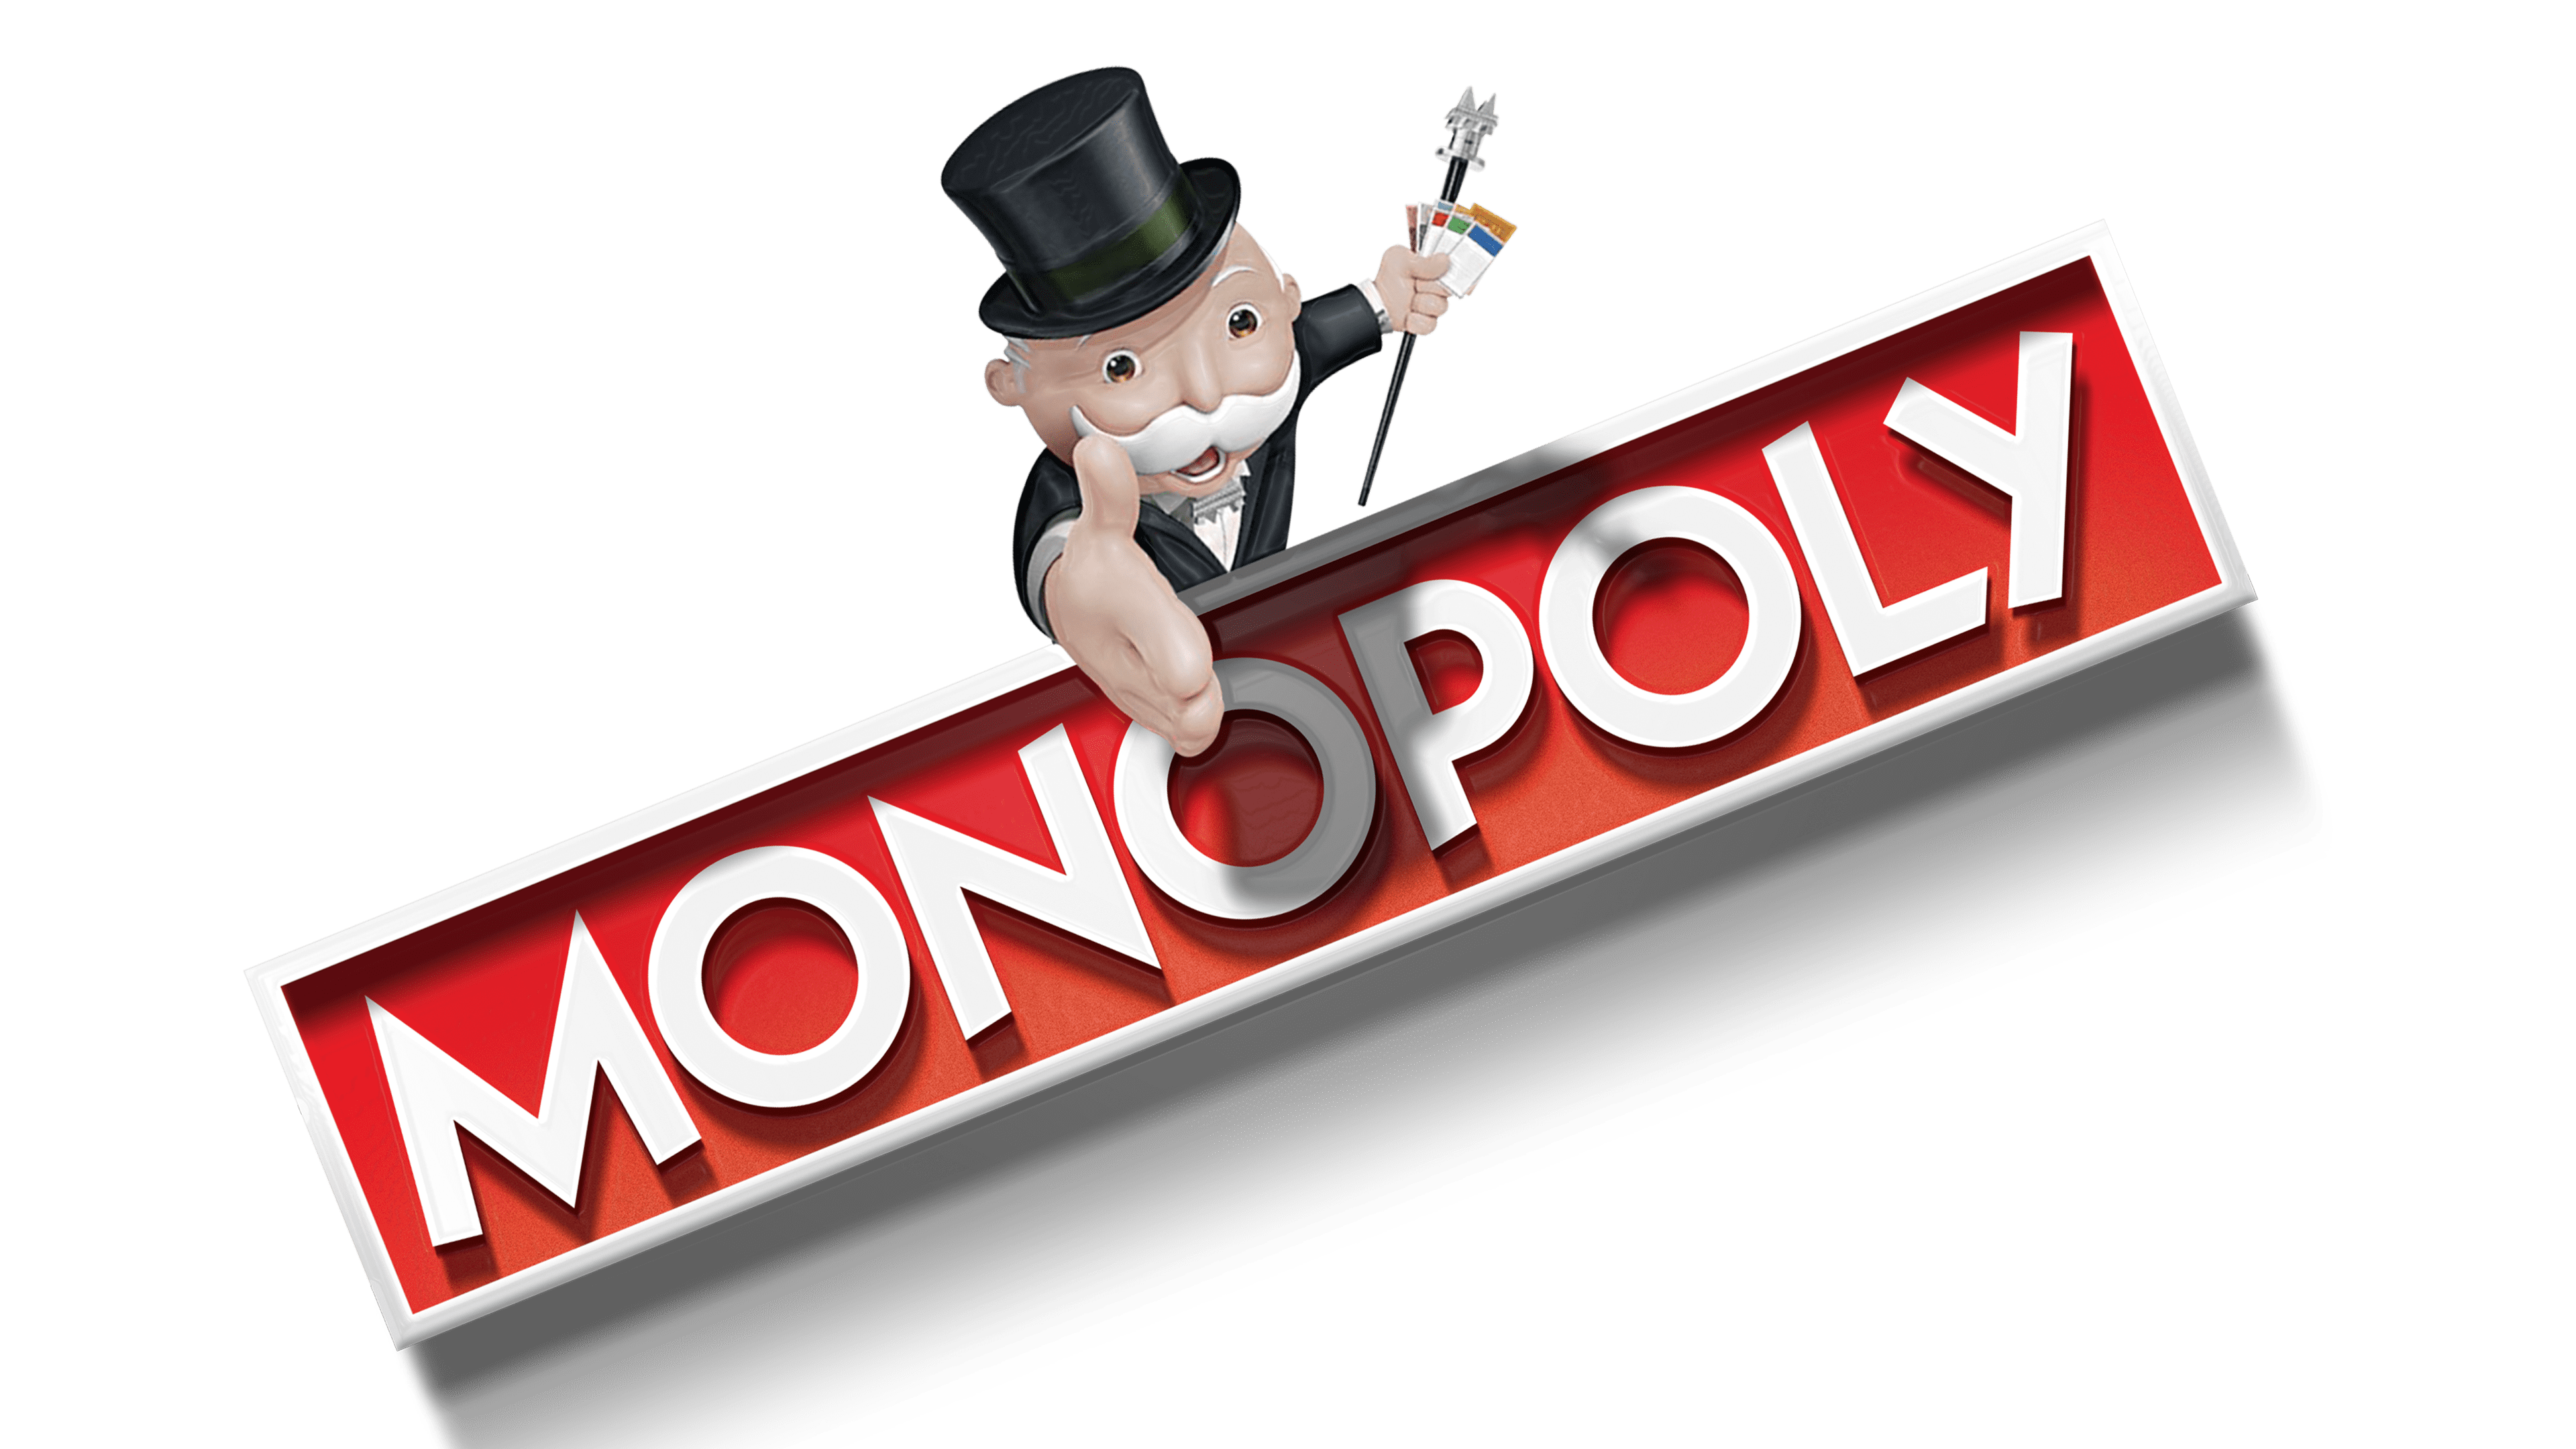 Space shuttle, monopoly Logo, Monopoly Deal, year, parker Brothers, Monopoly  Junior, Monopoly, Littlest Pet Shop, Dachshund, hasbro | Anyrgb